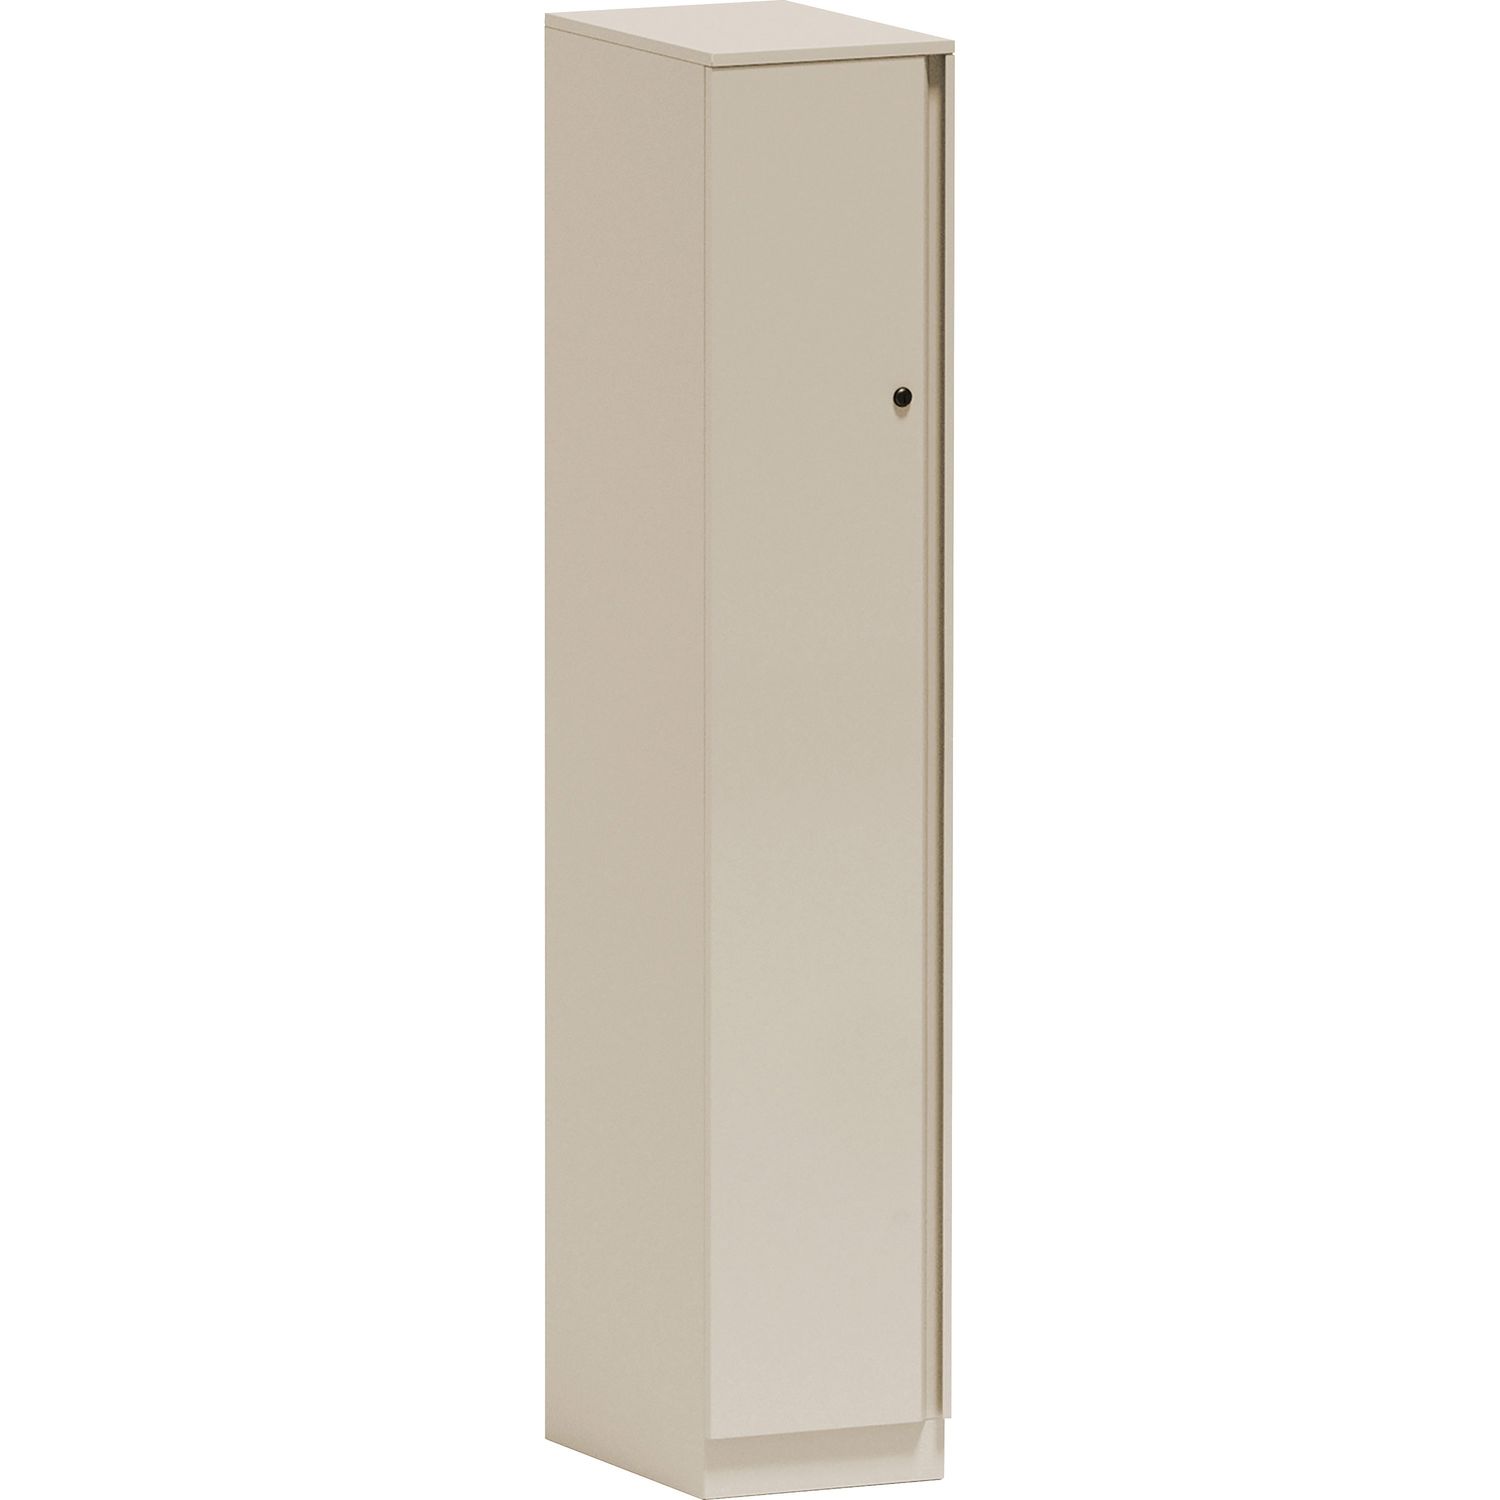 Single Locker for Jacket, Shoes, Overall Size 65.9" x 12", Beige, Metal